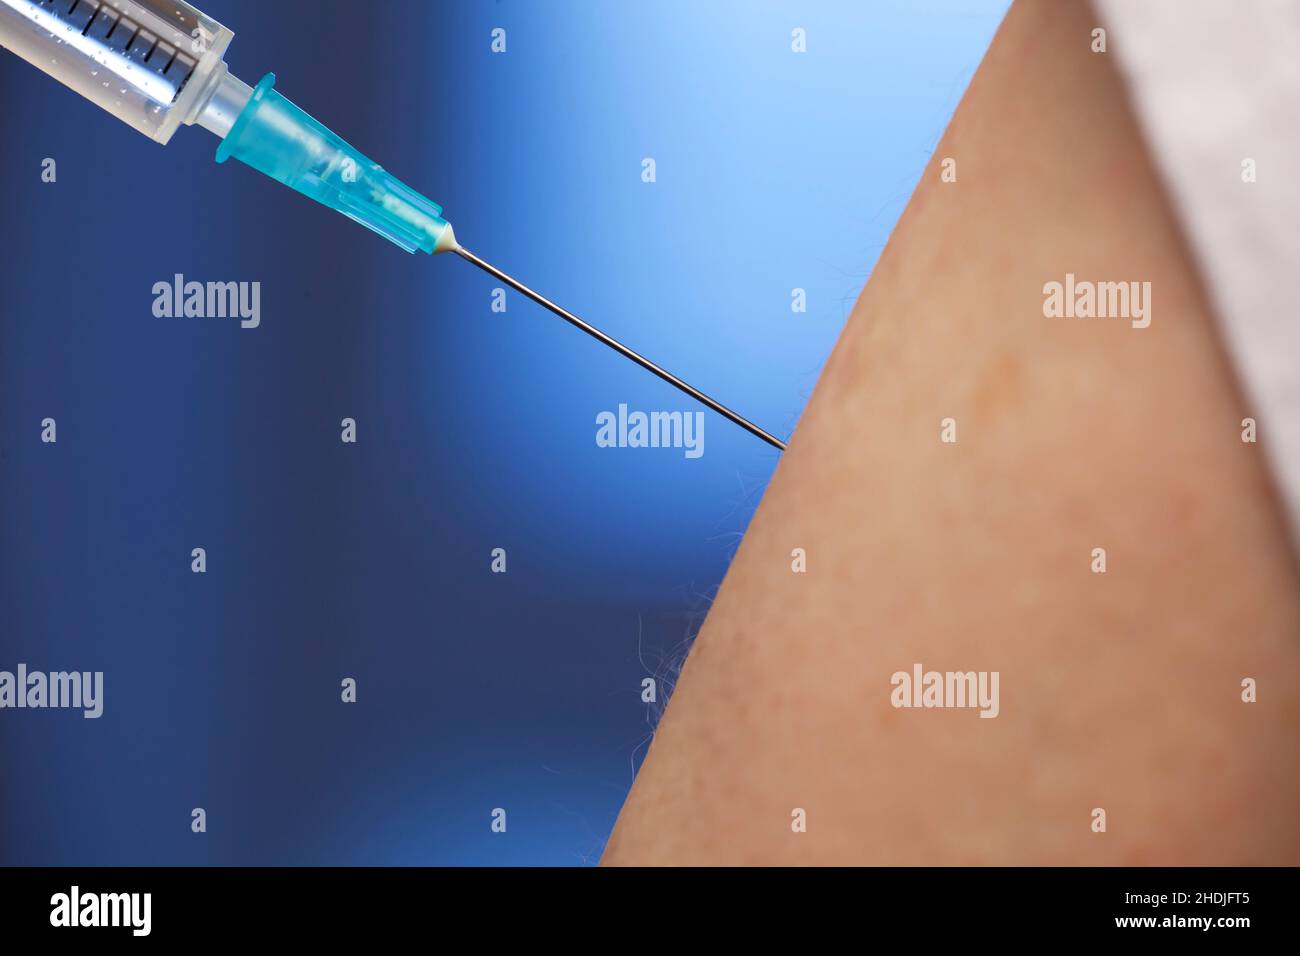 syringe, injection, vaccine, syringes, injections, vaccinations Stock Photo